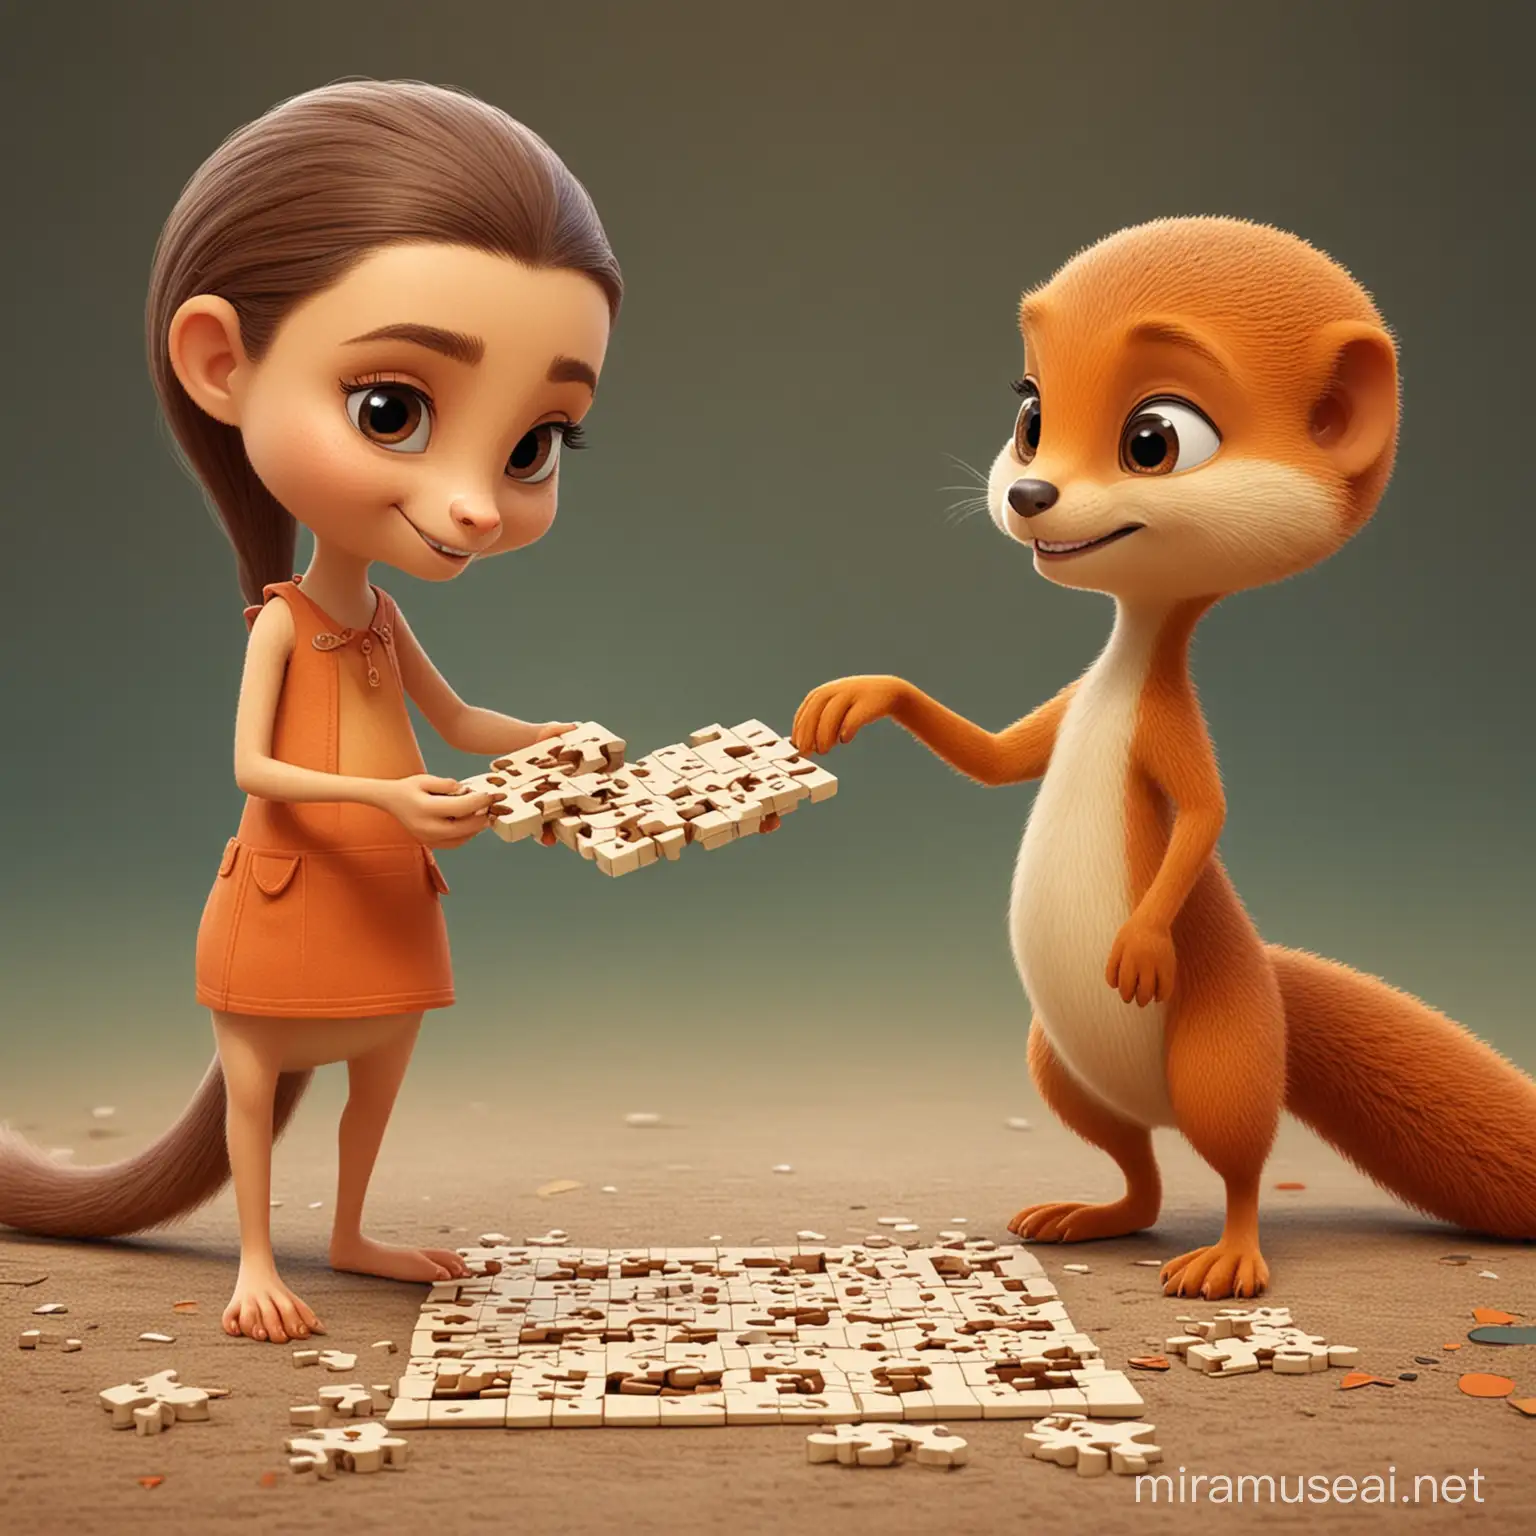 Adorable Cartoon Mongoose and Human Friend Solving Puzzle Together